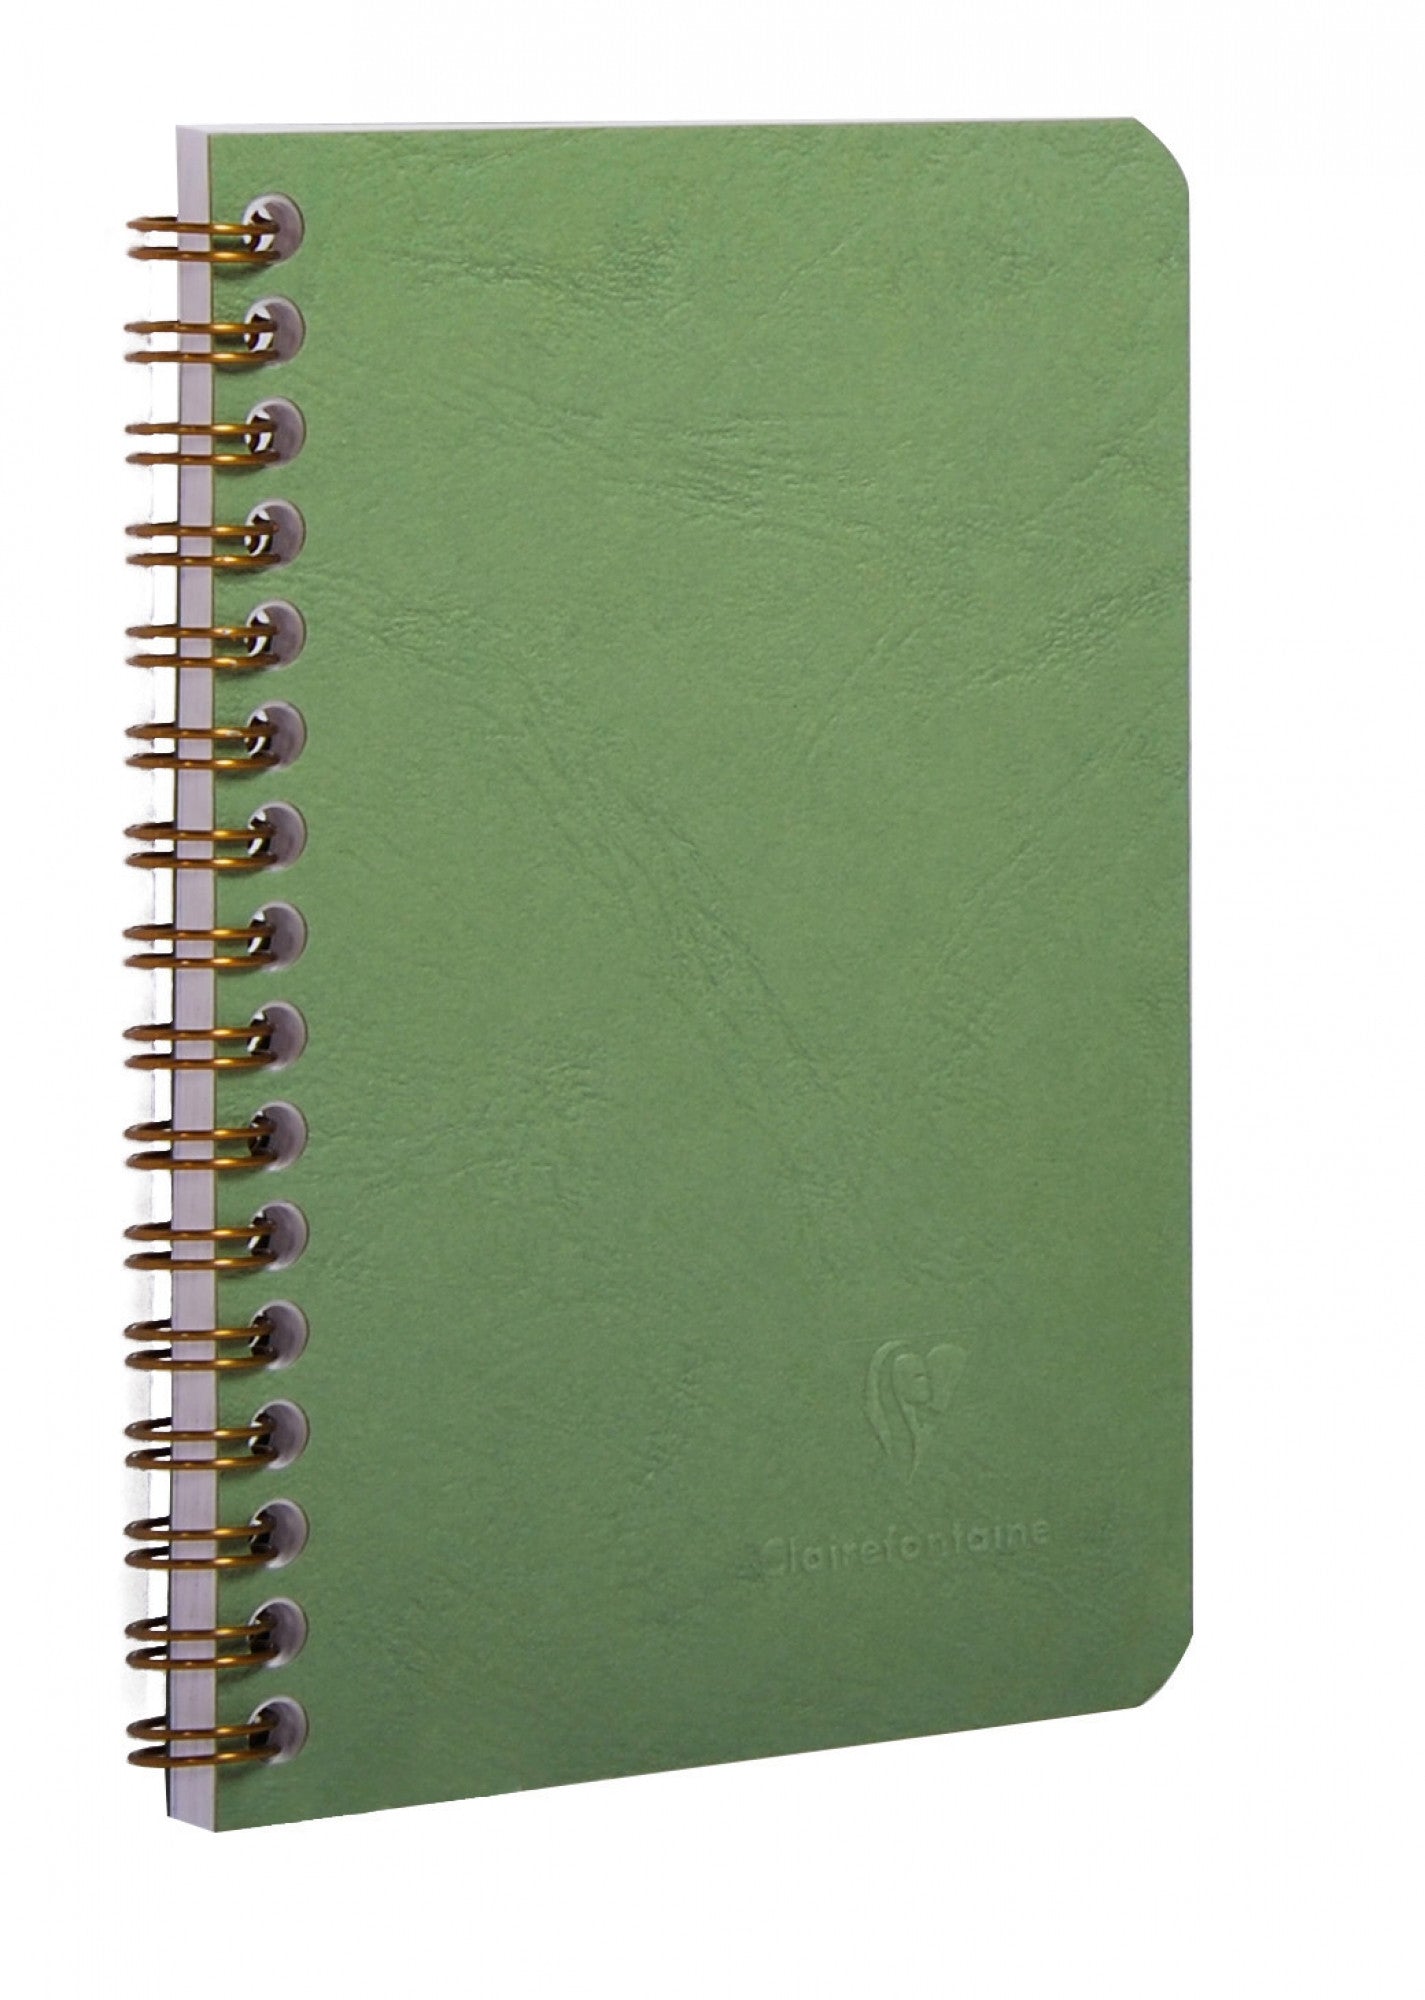  Clairefontaine Wirebound Notebook - Ruled 90 sheets